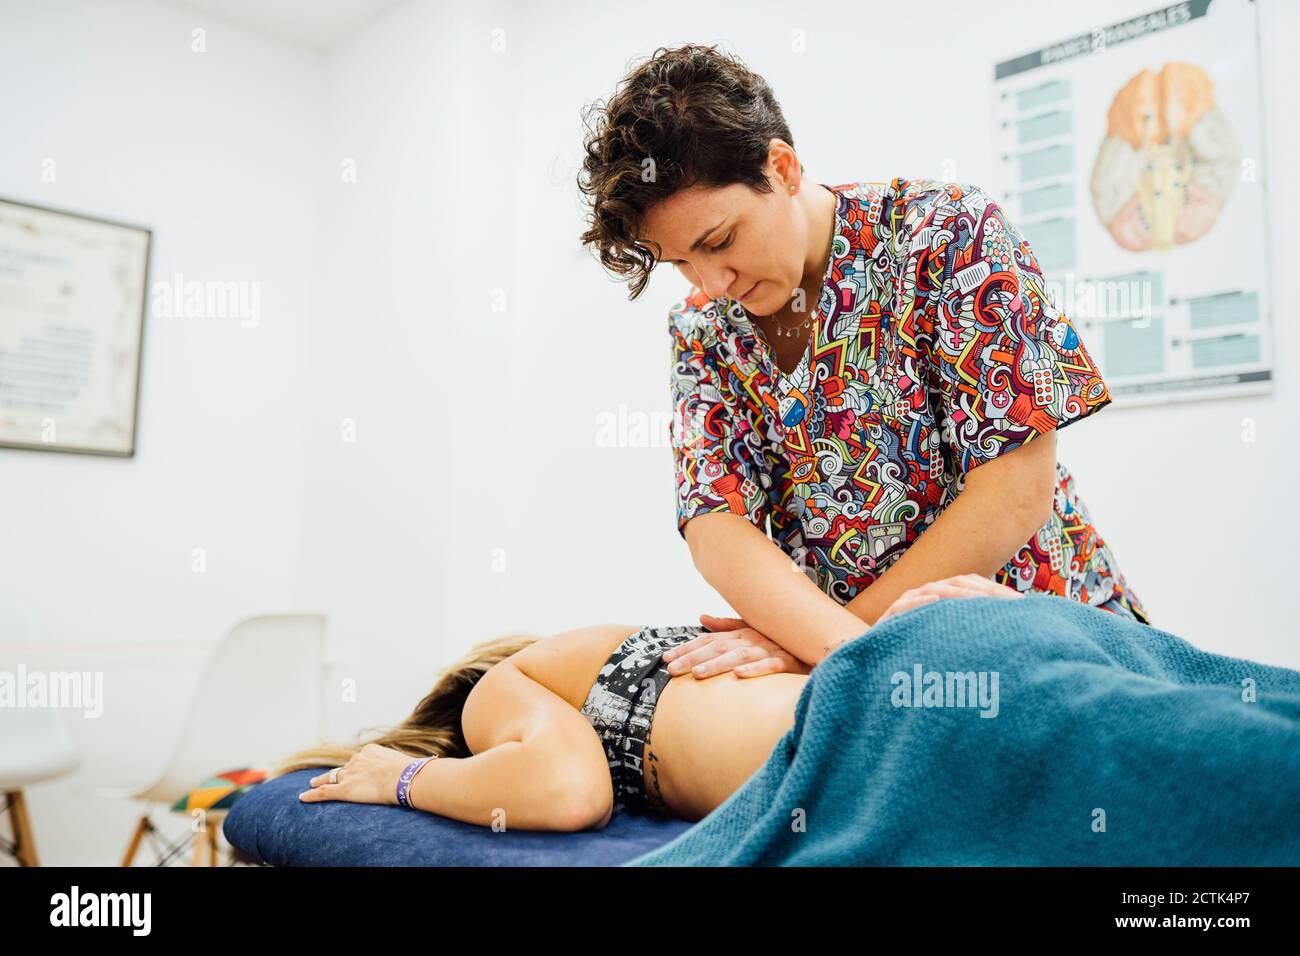 Female osteopath therapist giving back massage to sportswoman at health spa Stock Photo